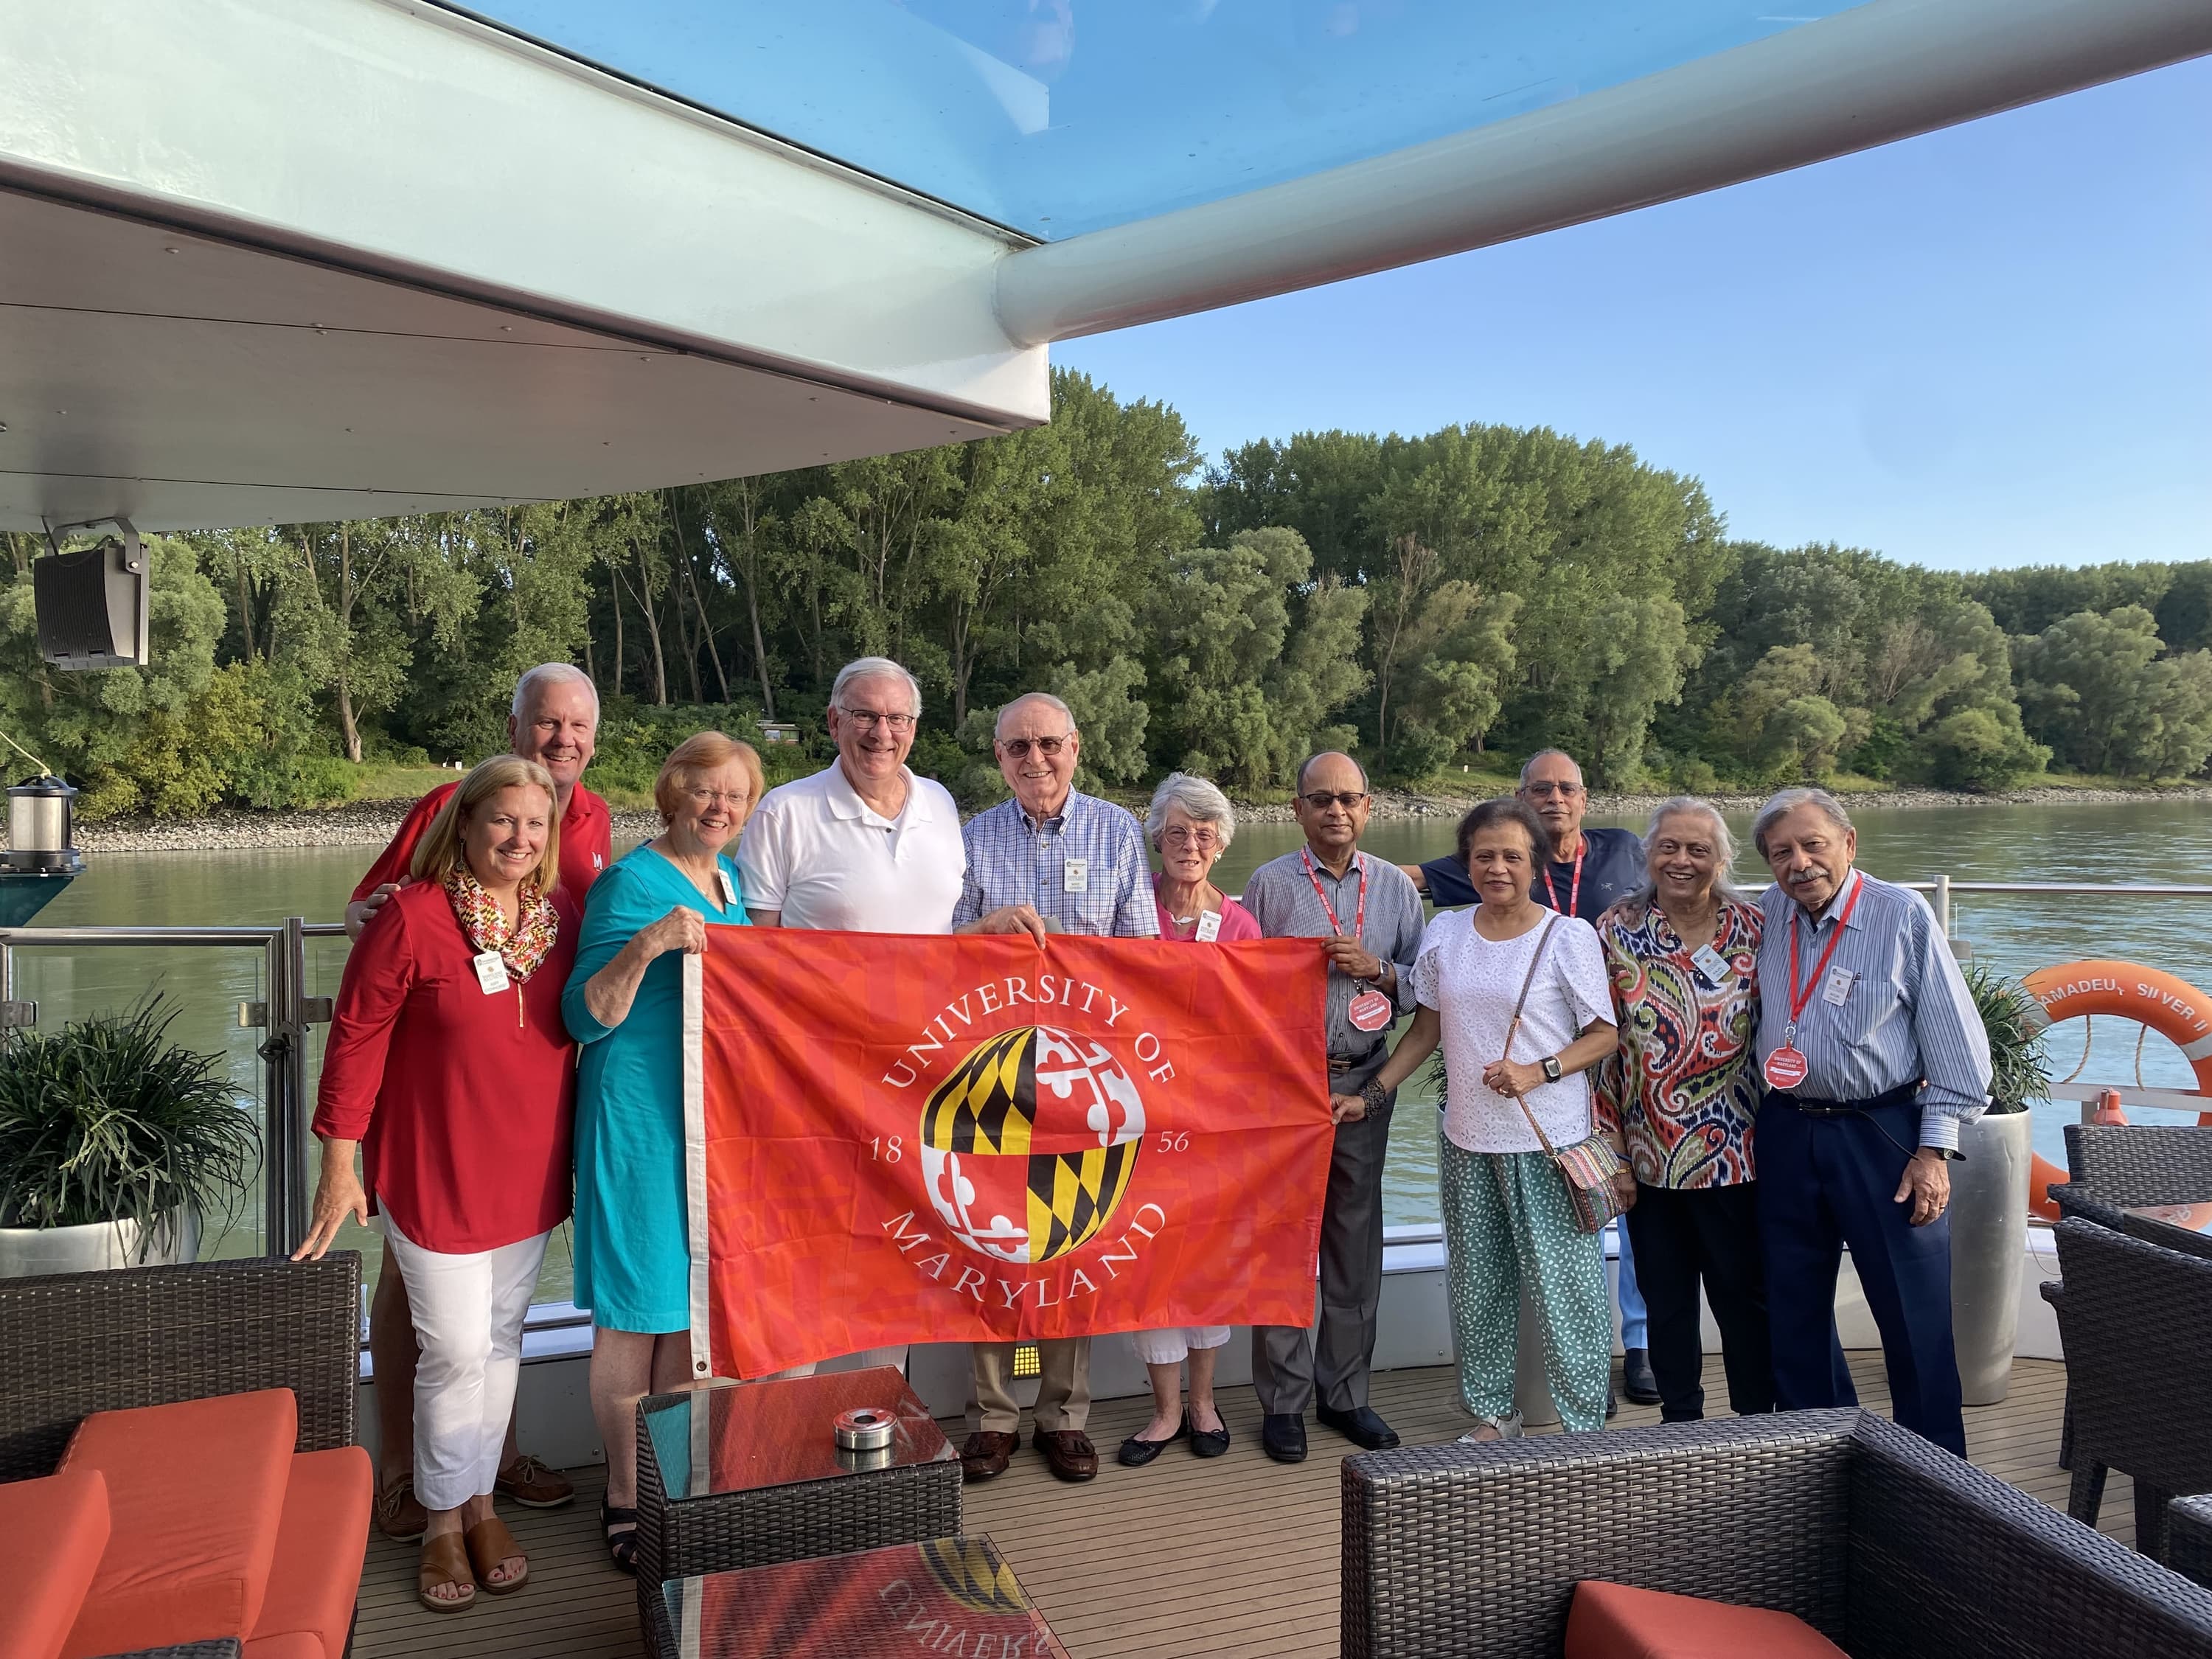 A group of Terp alums hold up a University of Maryland flag on a previous trip.